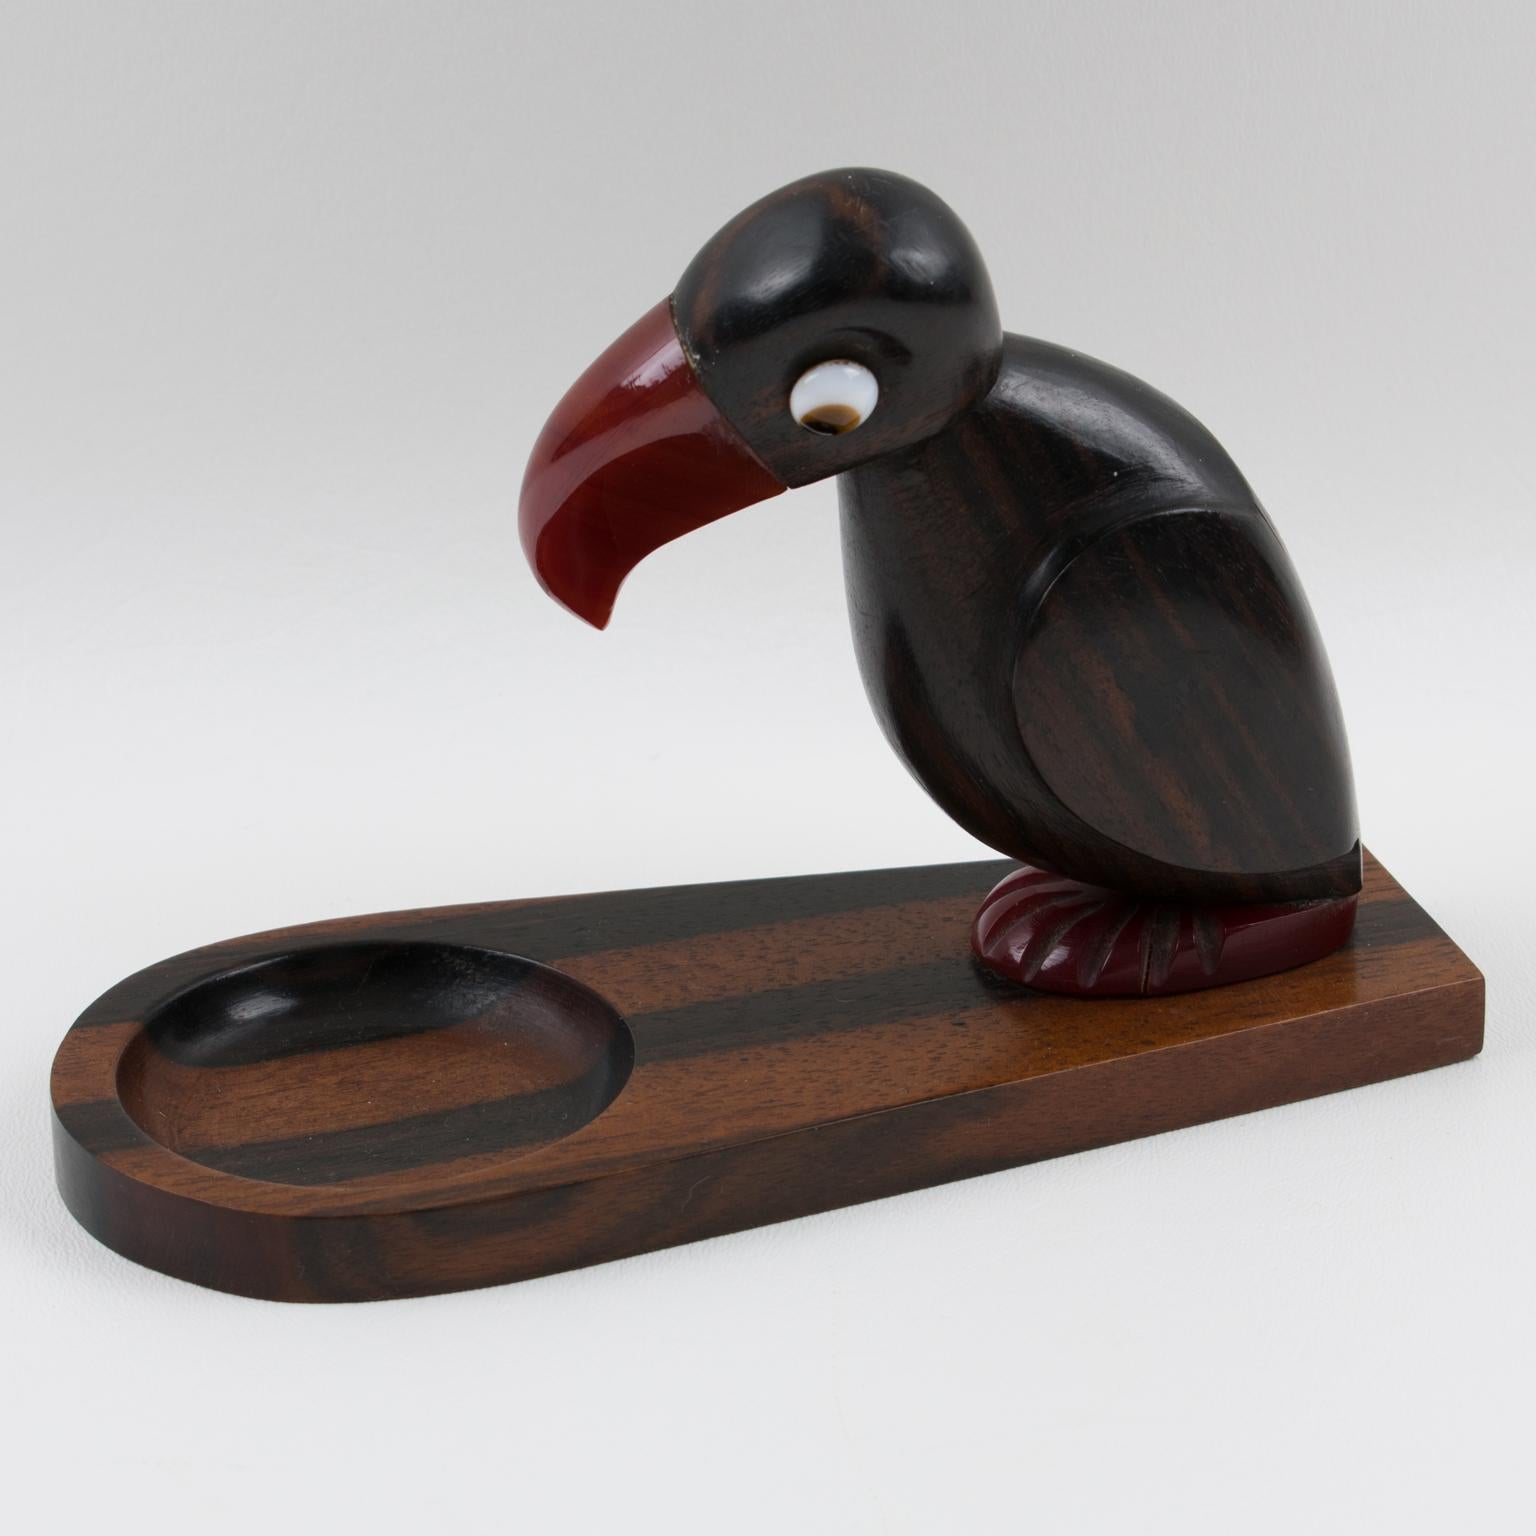 Stylish English Art Deco Henry Howell & Co Ltd, YZ bird novelty ashtray or catchall, dating from the 1920s-1930s for Alfred Dunhill Ltd.
This funny standing bird has a carved Macassar wood body with a cherry red amber Bakelite beak, feet and glass